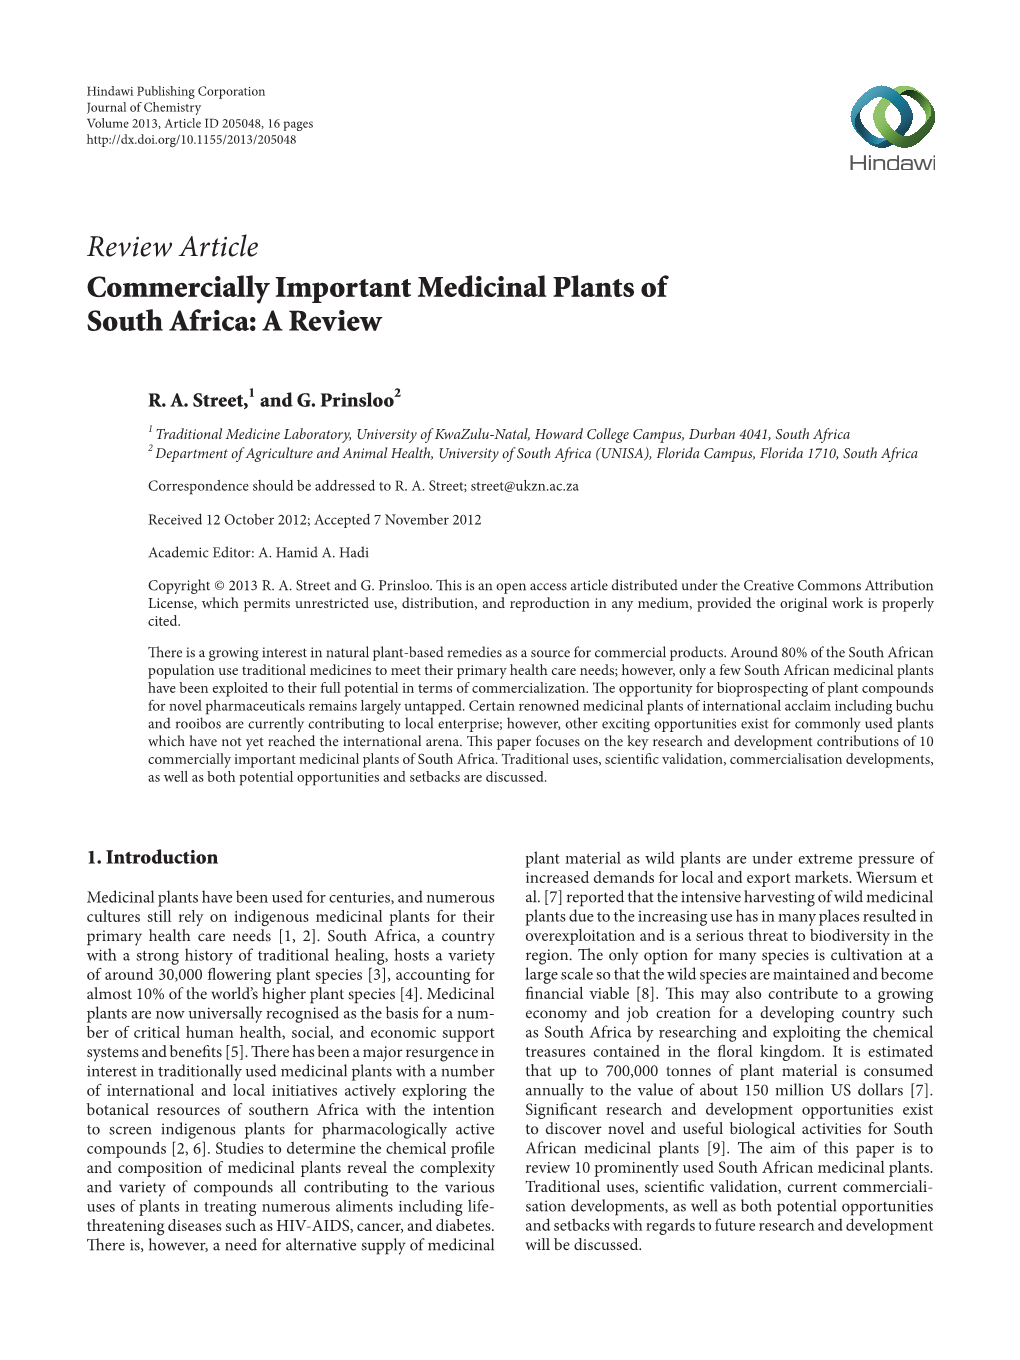 Commercially Important Medicinal Plants of South Africa: a Review